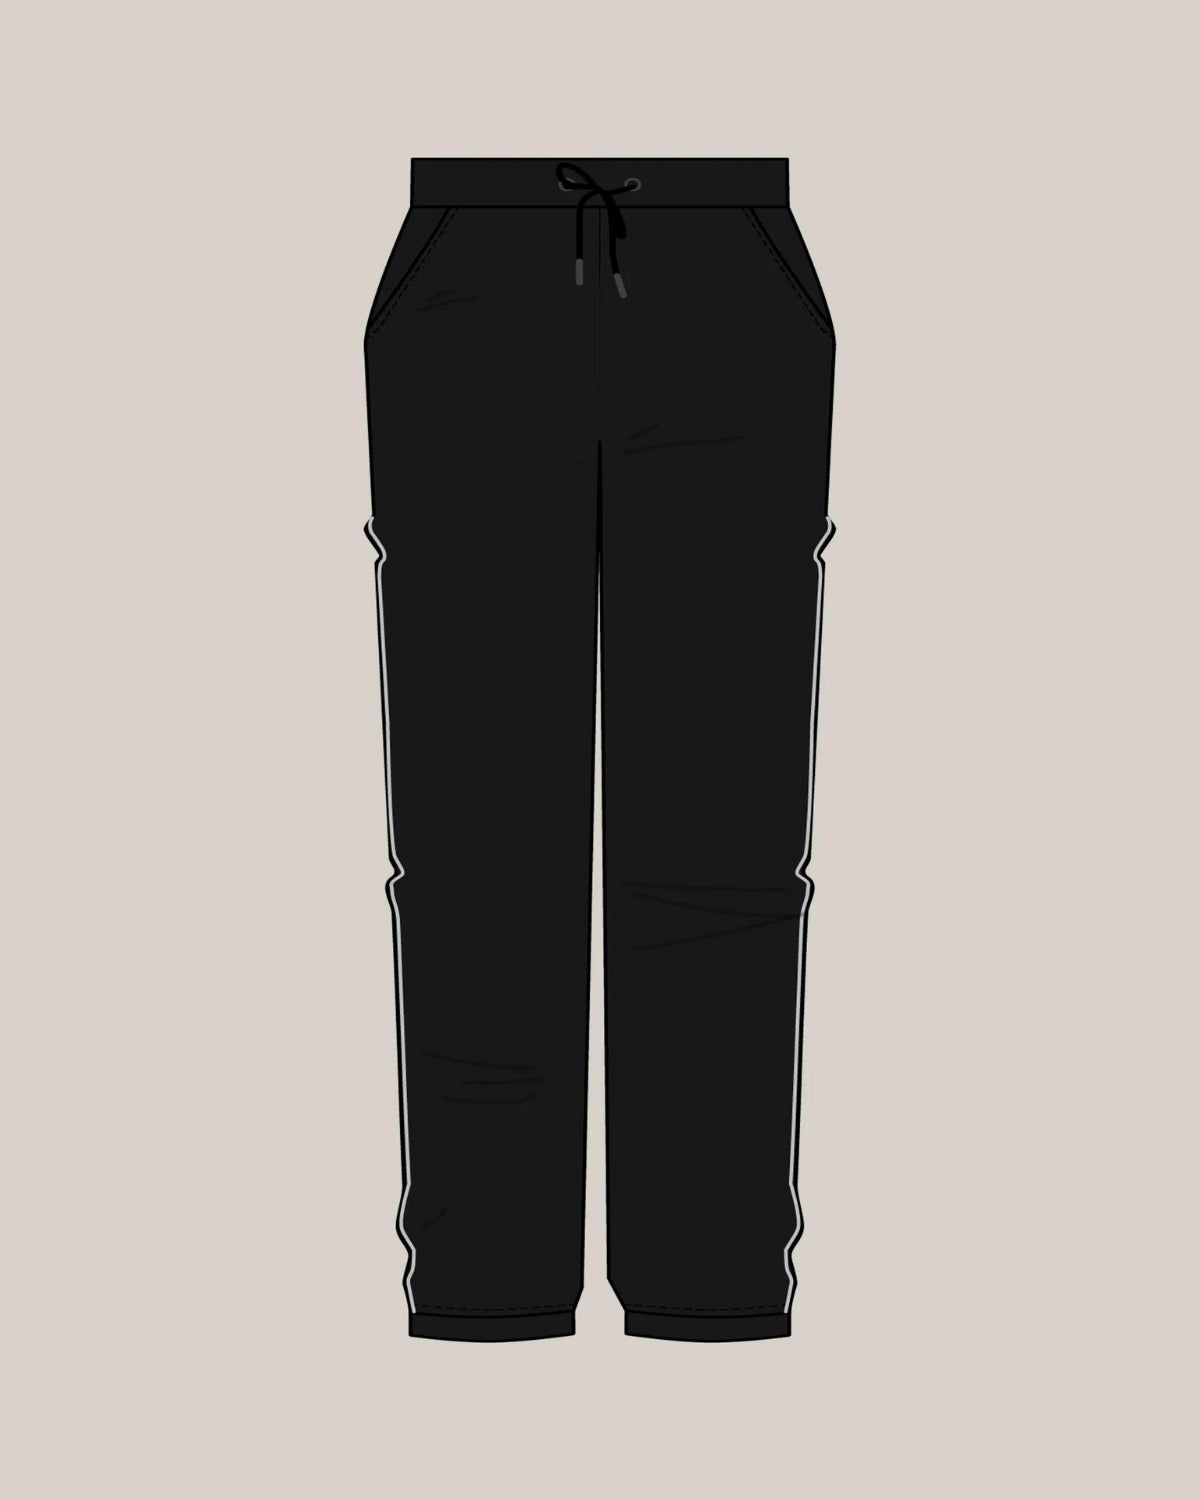 Unisex Tight Fitted Jogger - Black Shadow